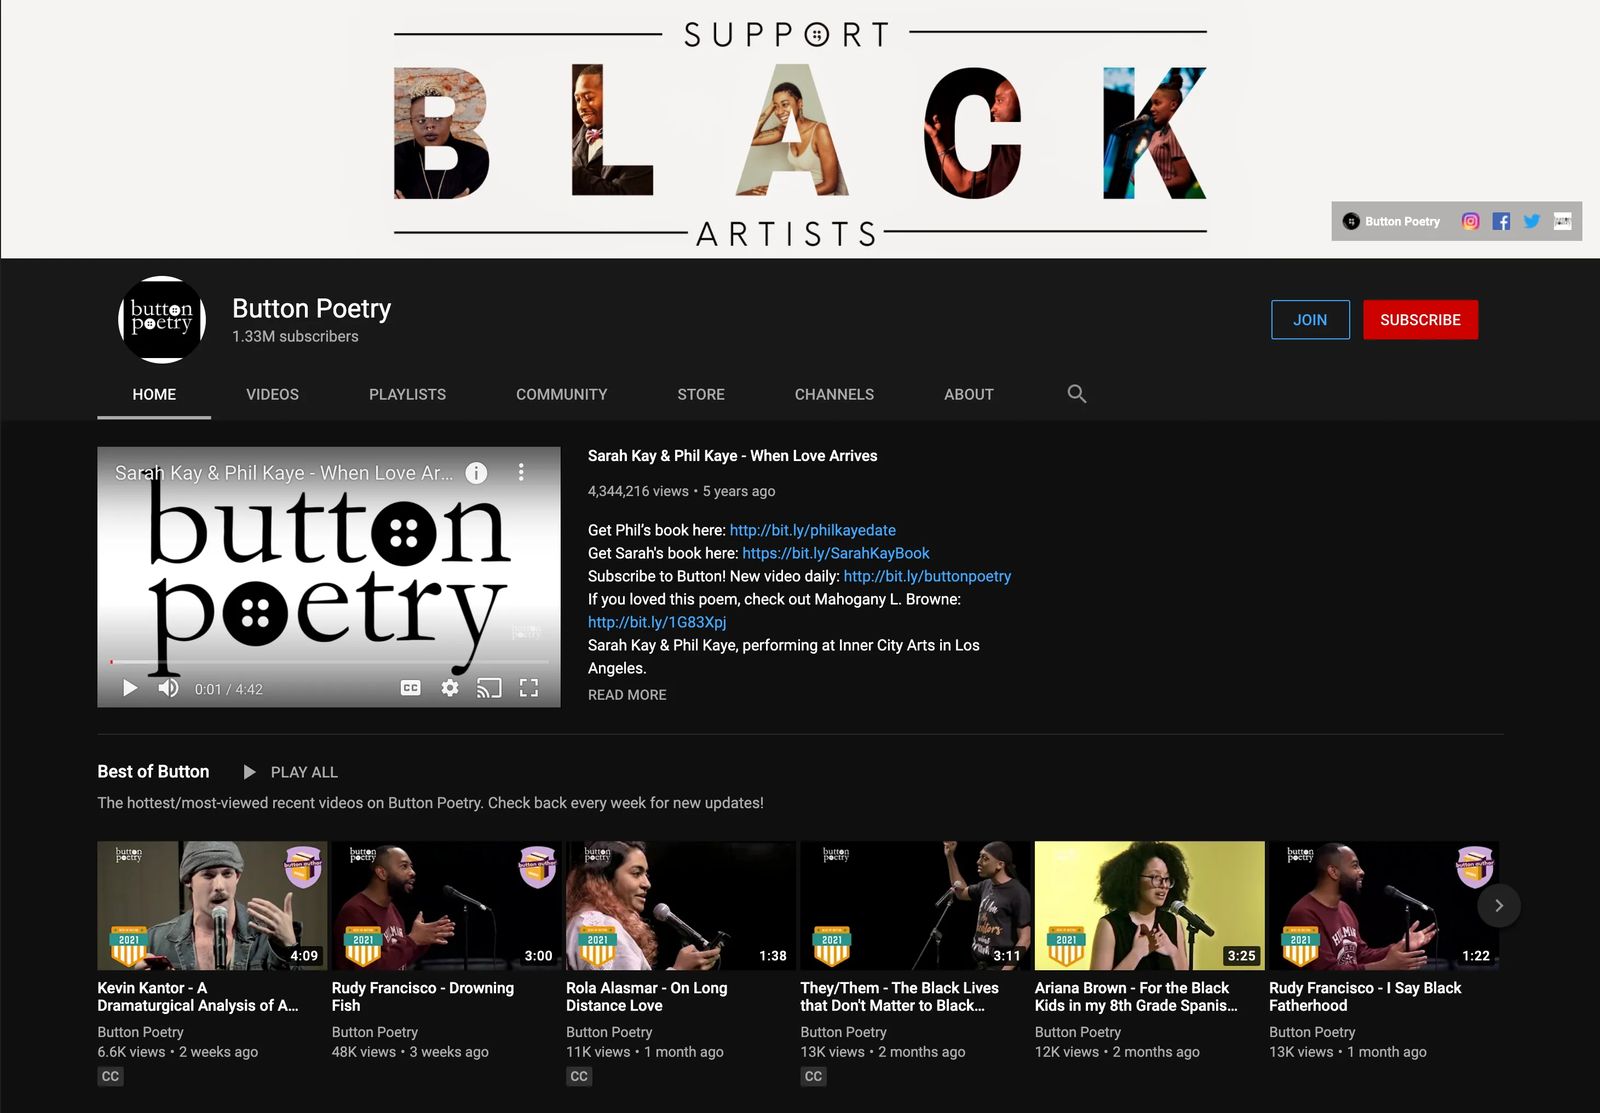 youtube content creator example, button poetry youtube channel screenshot